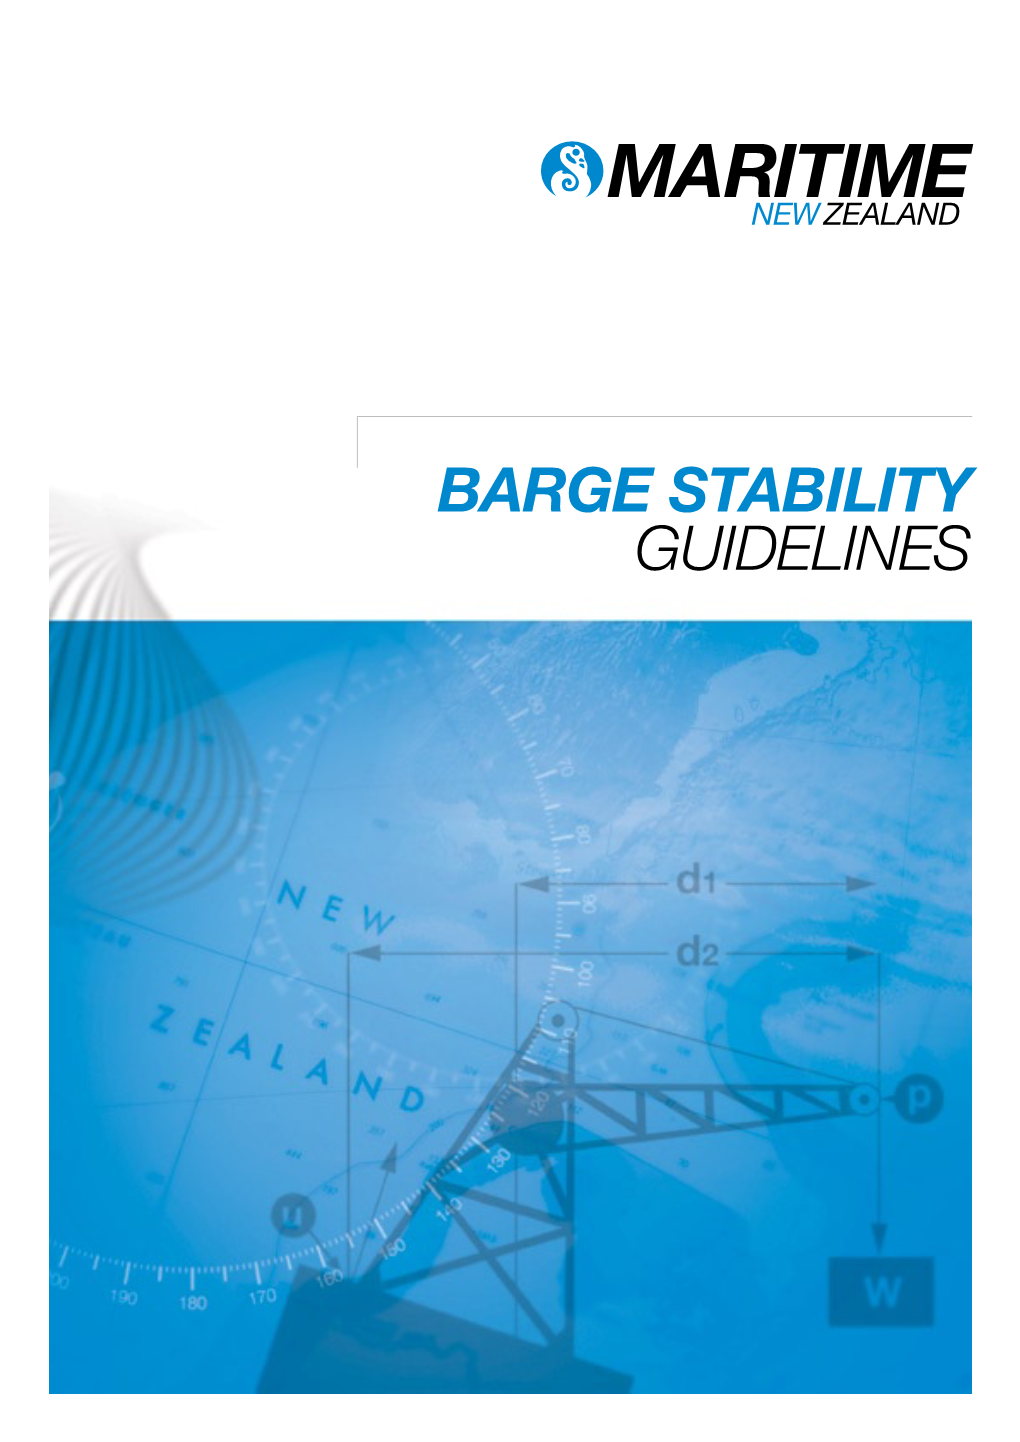 Barge Stability Guidelines Introduction